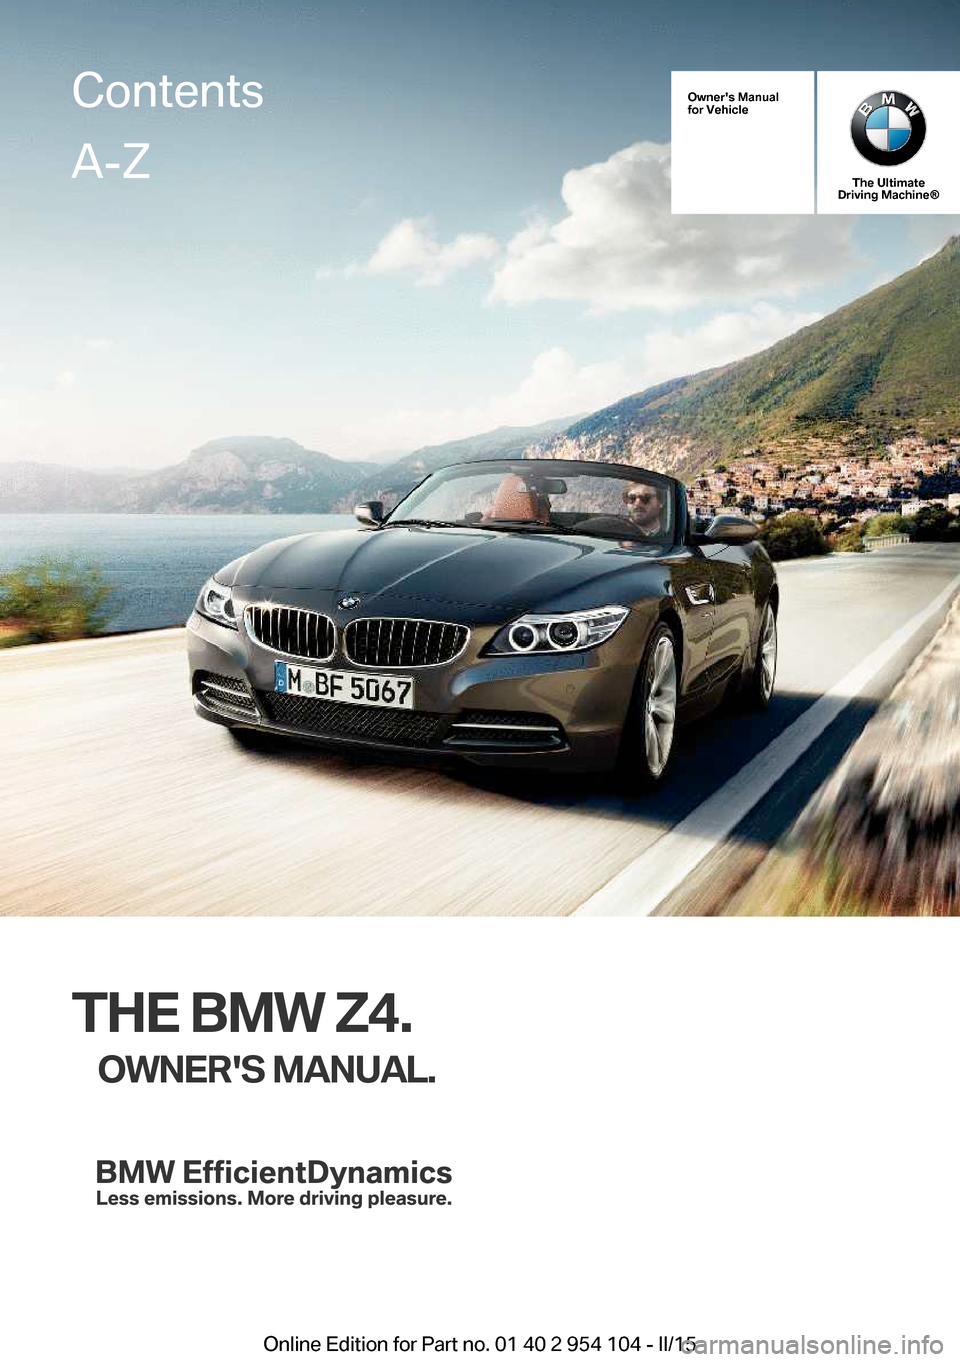 BMW Z4 2015 E89 Owners Manual Owners Manual
for Vehicle
The Ultimate
Driving Machine®
THE BMW Z4.
OWNERS MANUAL.
ContentsA-Z
Online Edition for Part no. 01 40 2 954 104 - II/15   